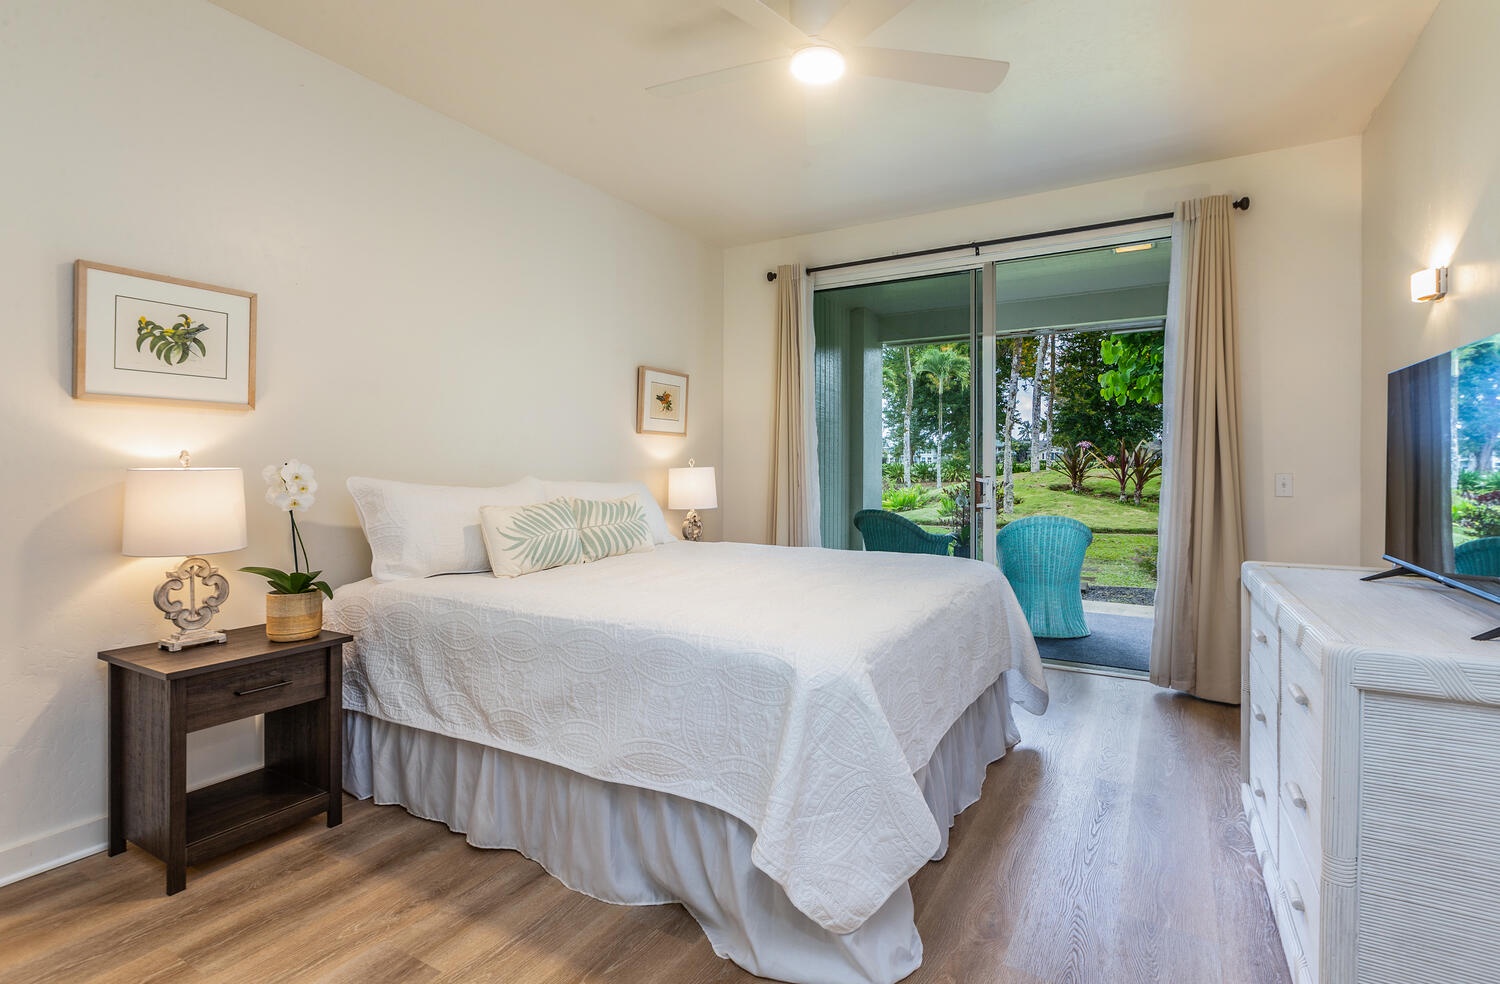 Princeville Vacation Rentals, Emmalani Court 414 - Wake up to the gorgeous, golden sunlight in the primary bedroom